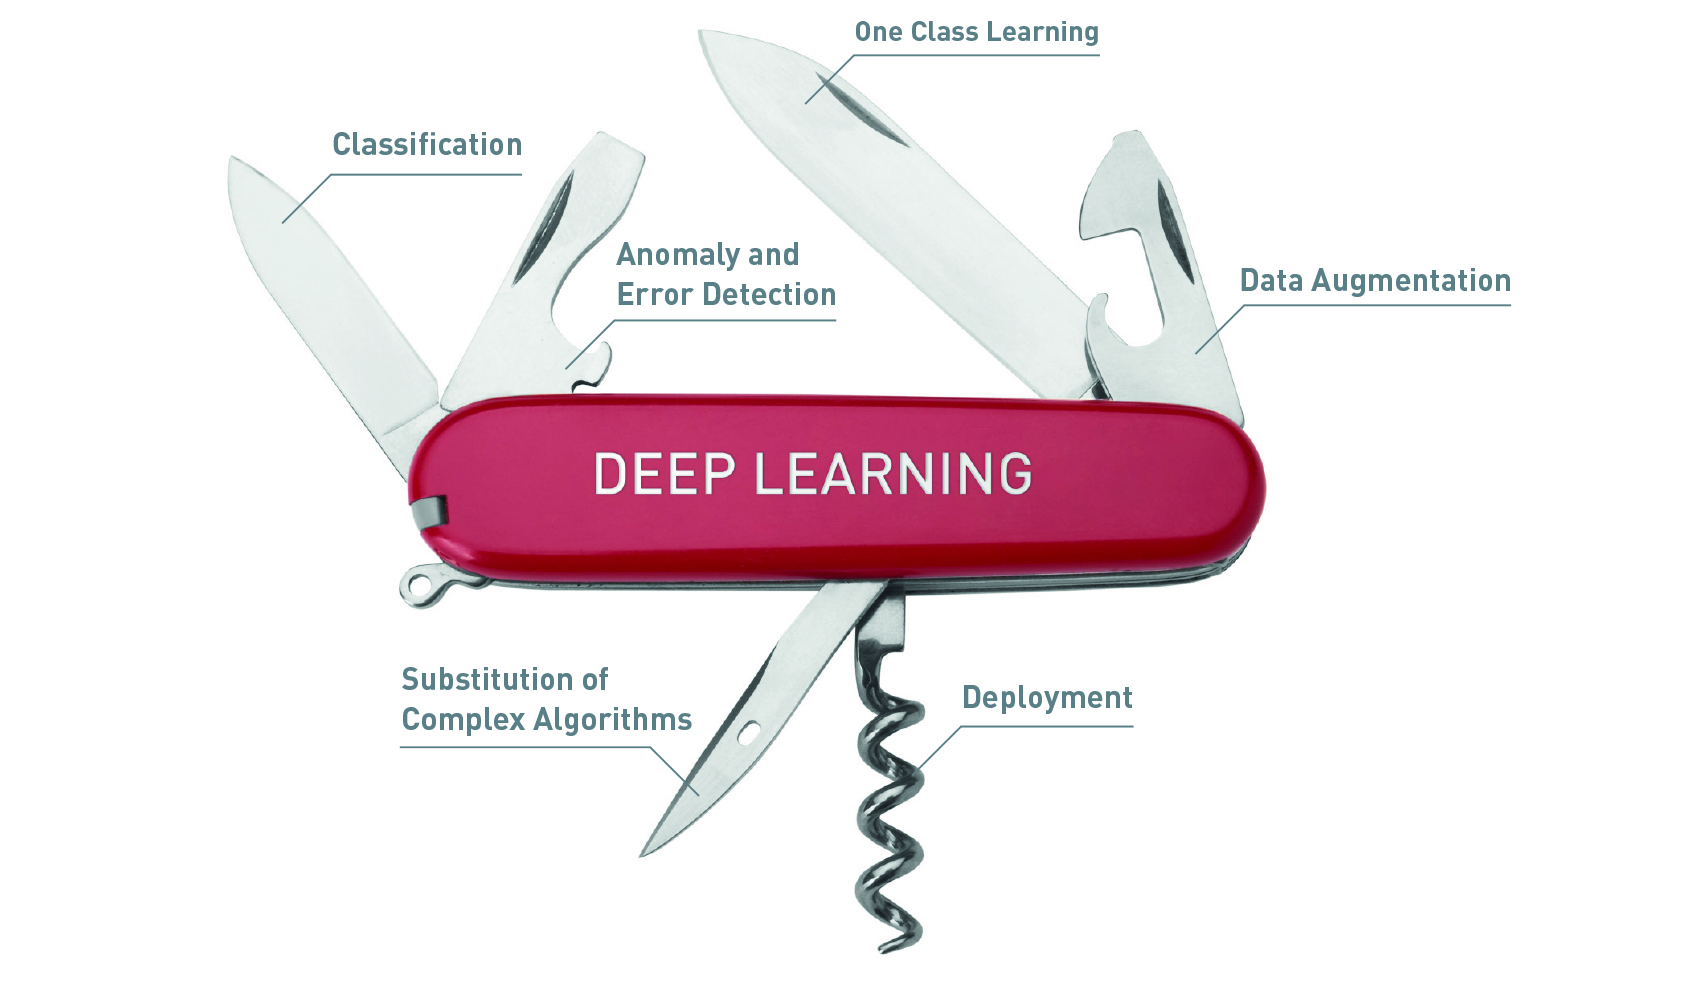 Swiss knife with Deep Learning Tools e.g. classification, one class learning, anomaly and error detection, data augmentation, substitutions of compley algorithms, deployment.  